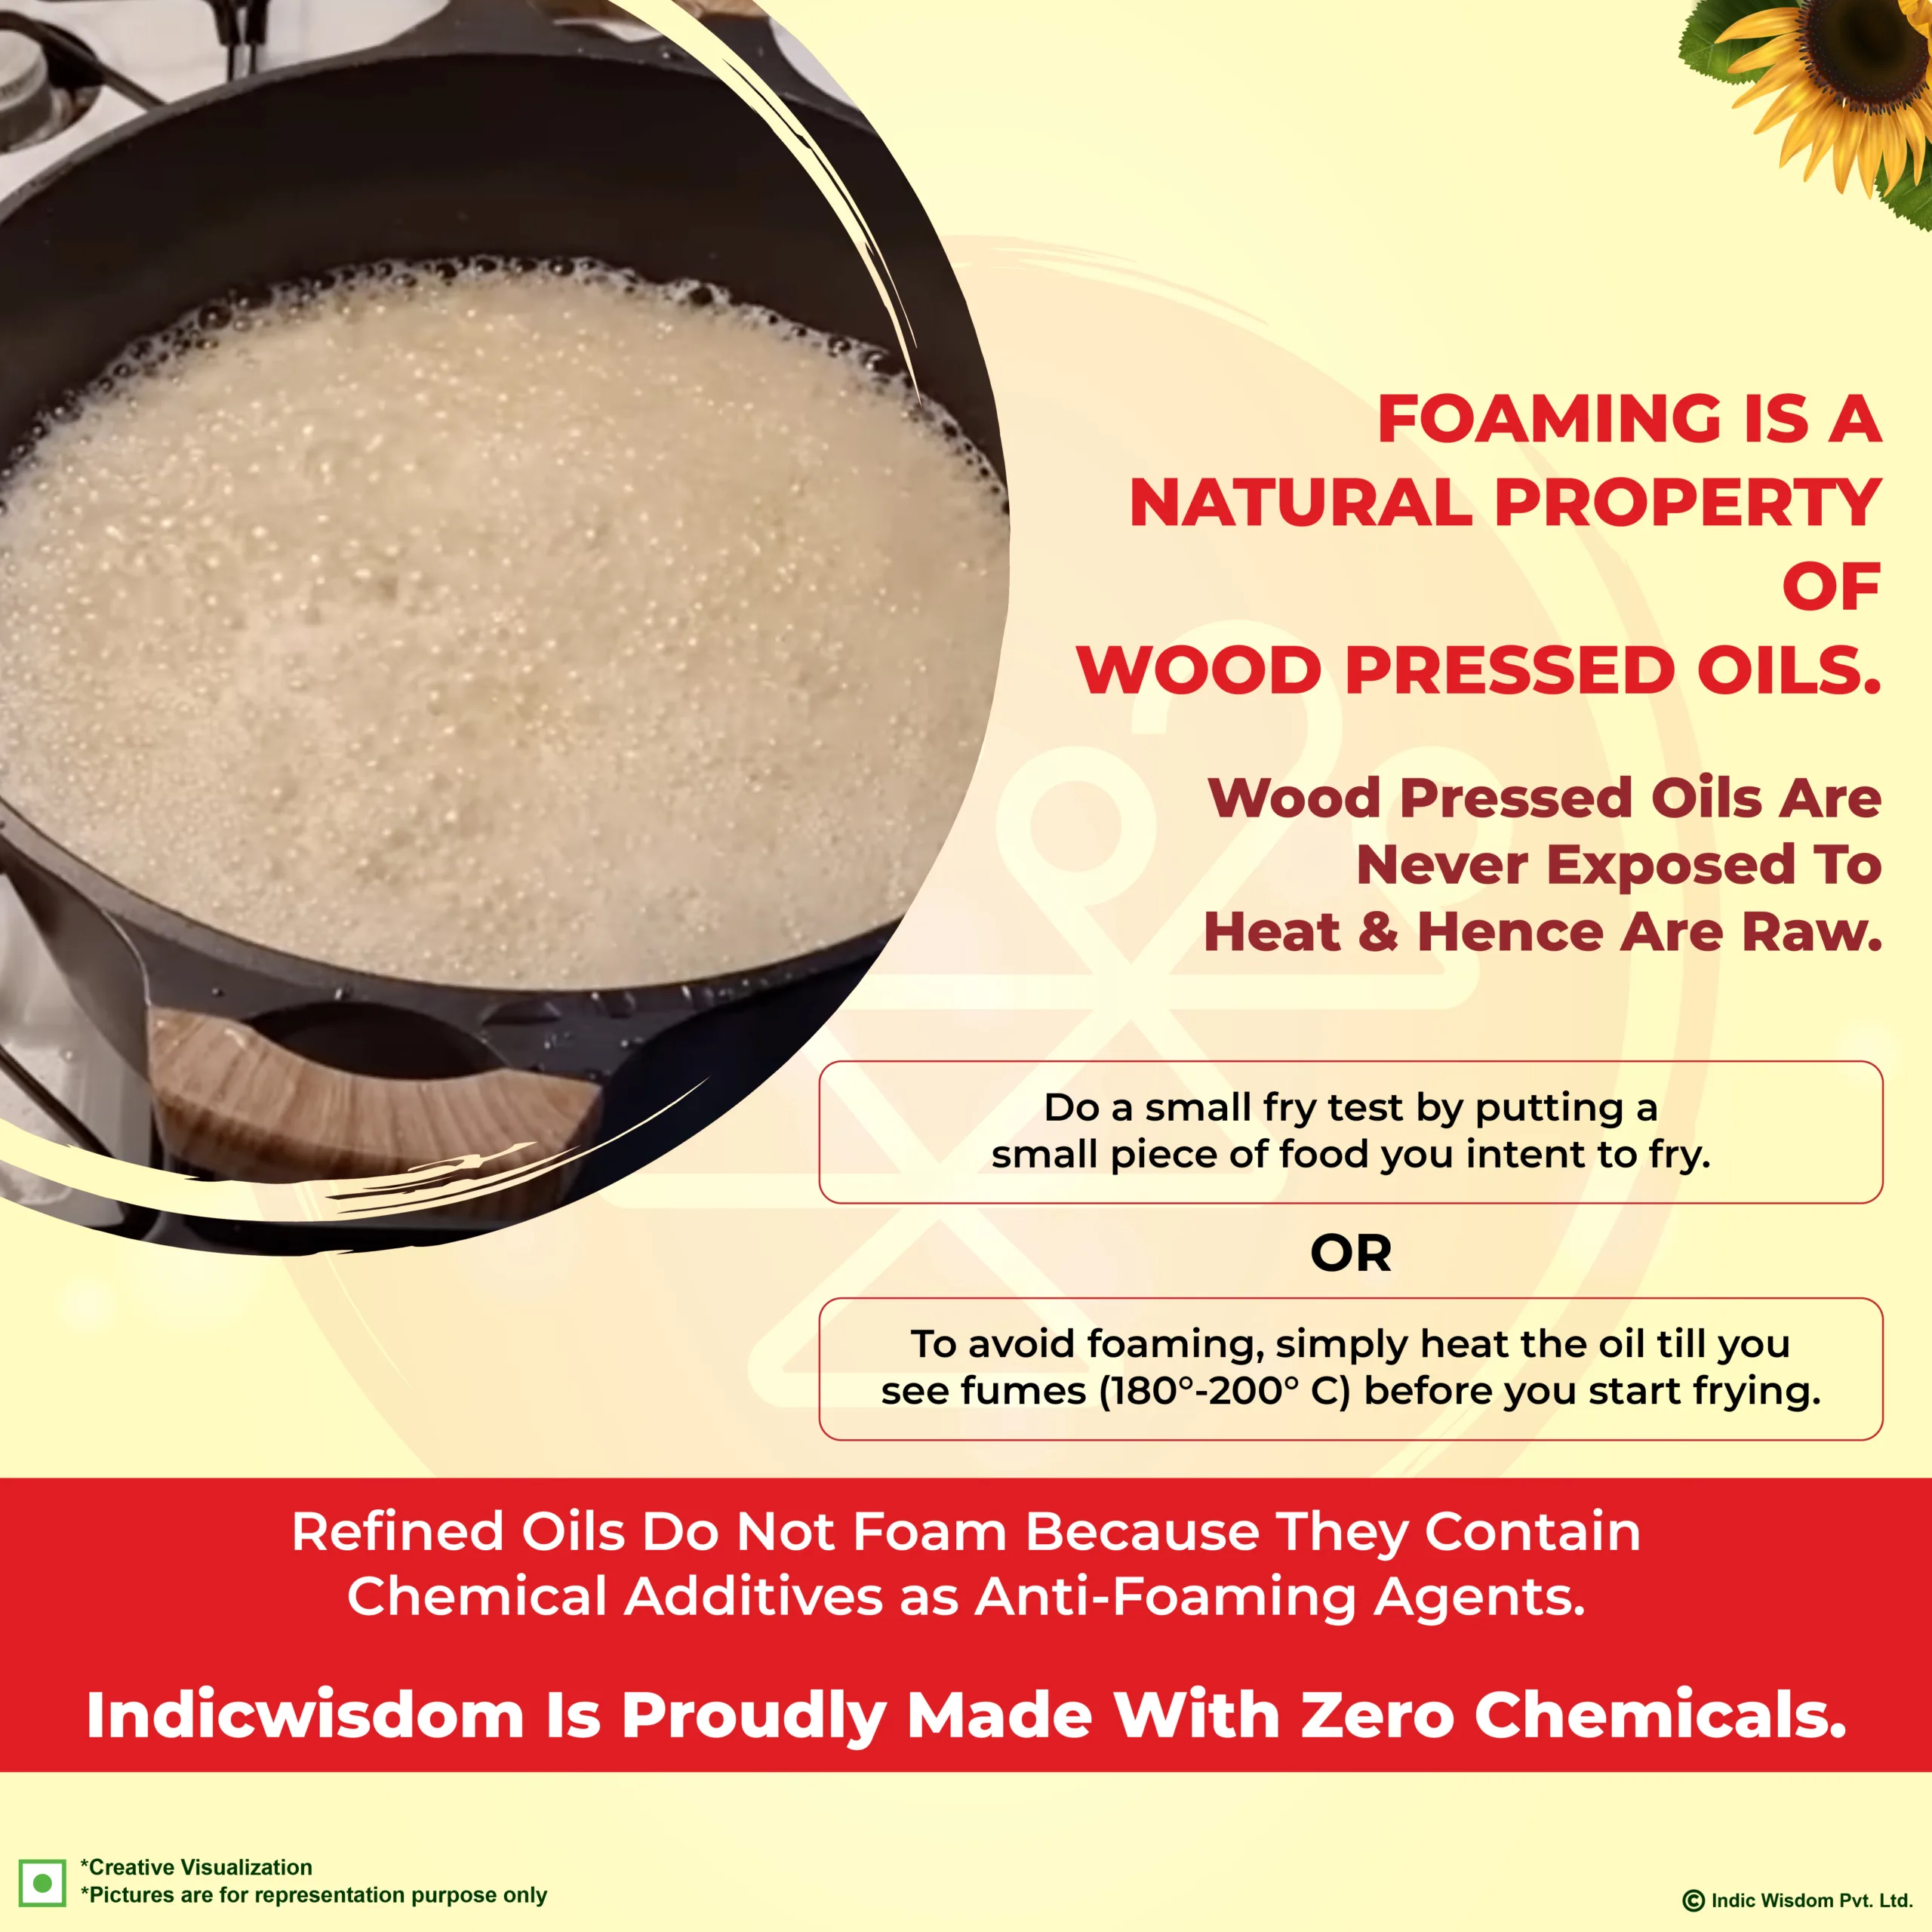 Foaming is a natural property of wood pressed oils